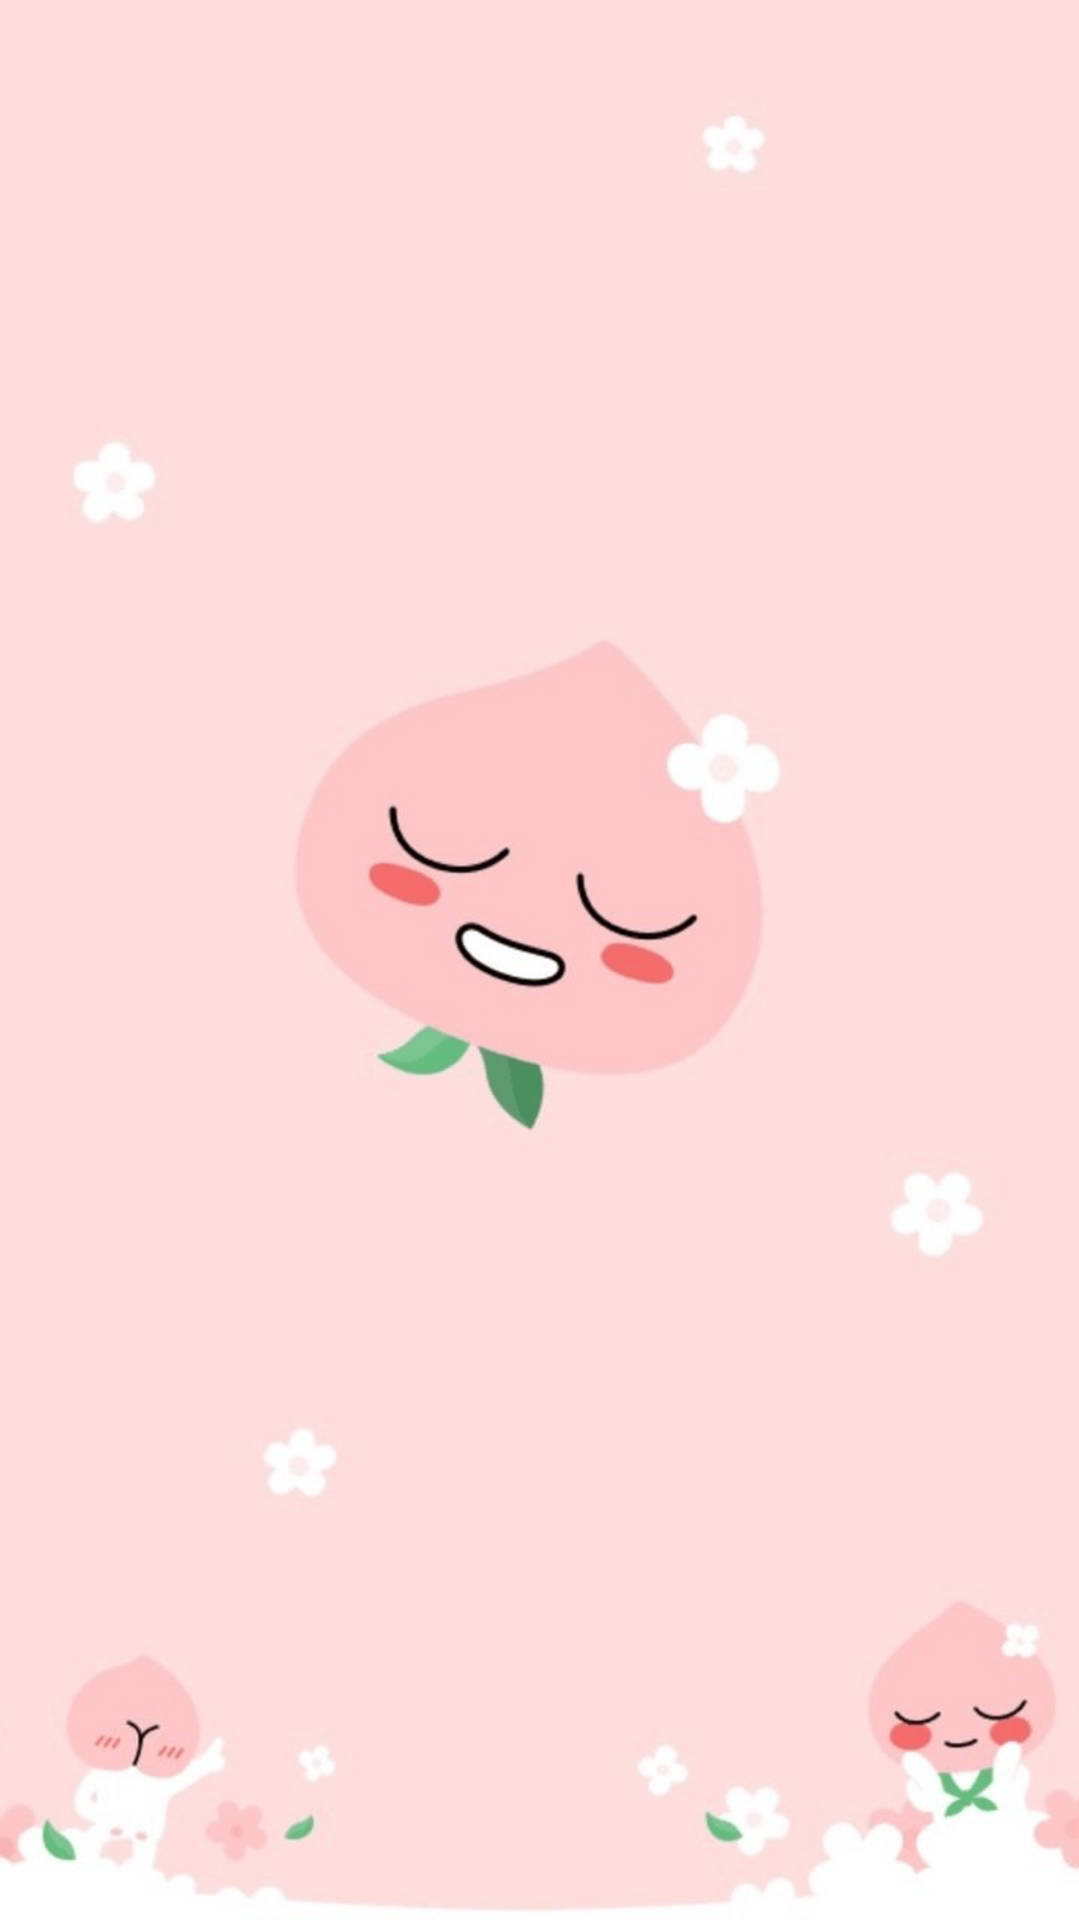 Sweet dreams are made of Peach! Wallpaper